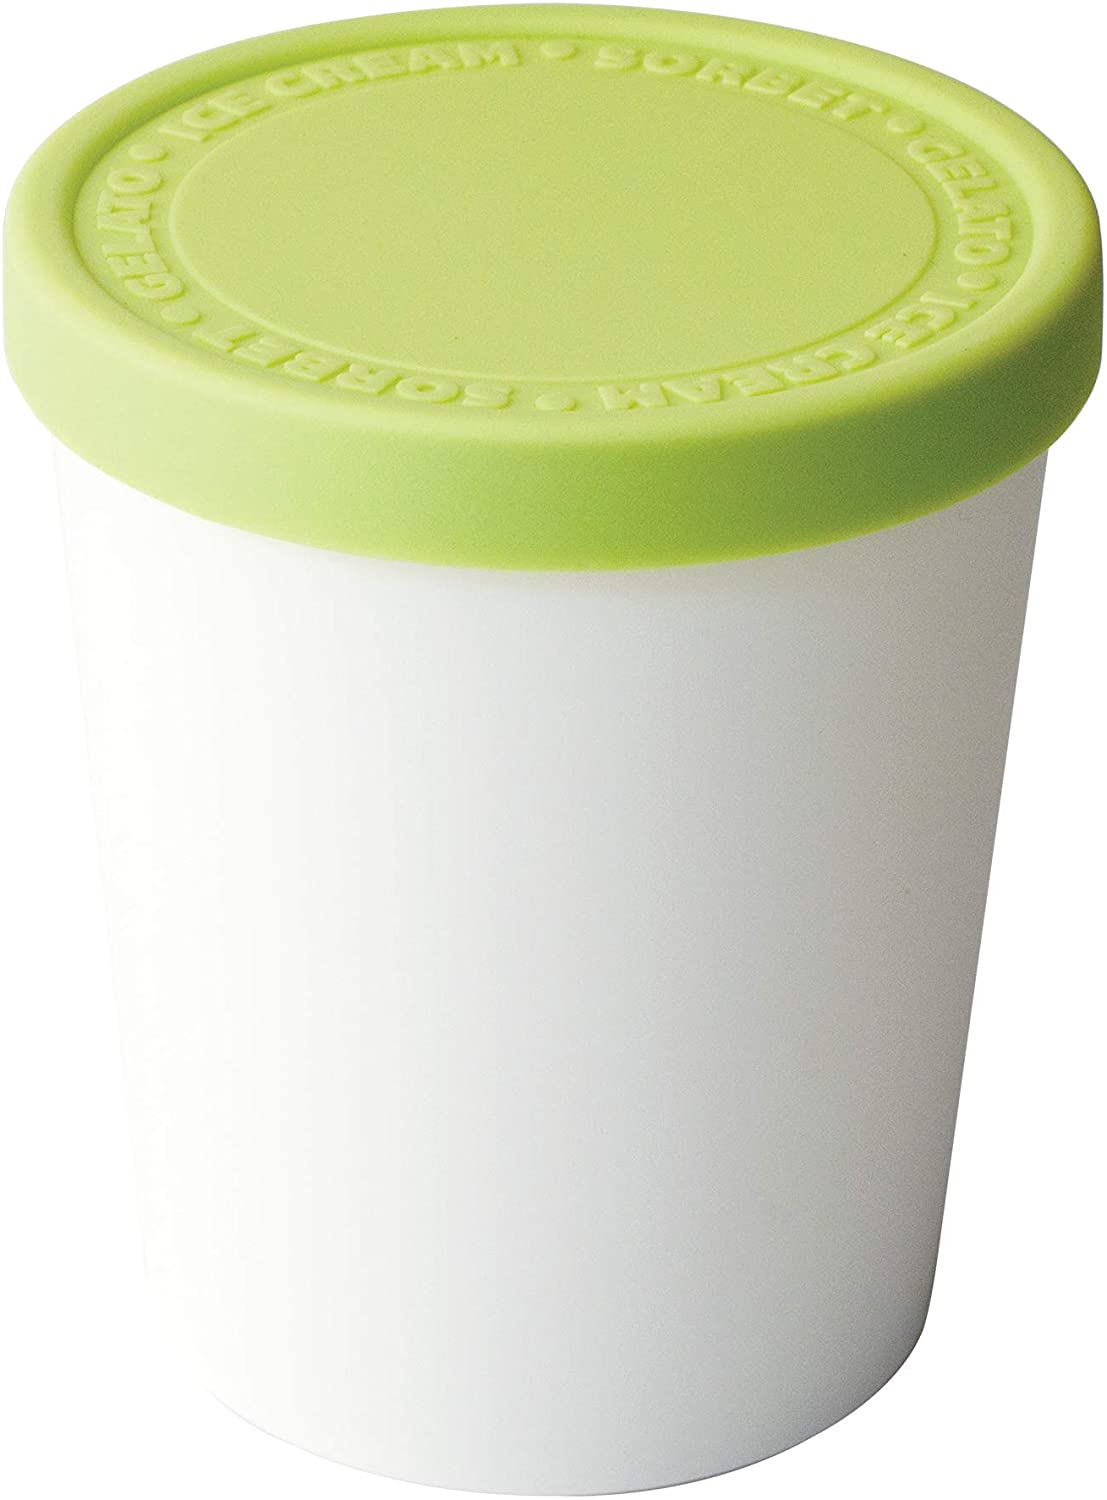 Tovolo Sweet Treat Tight-Fitting Ice Cream Container